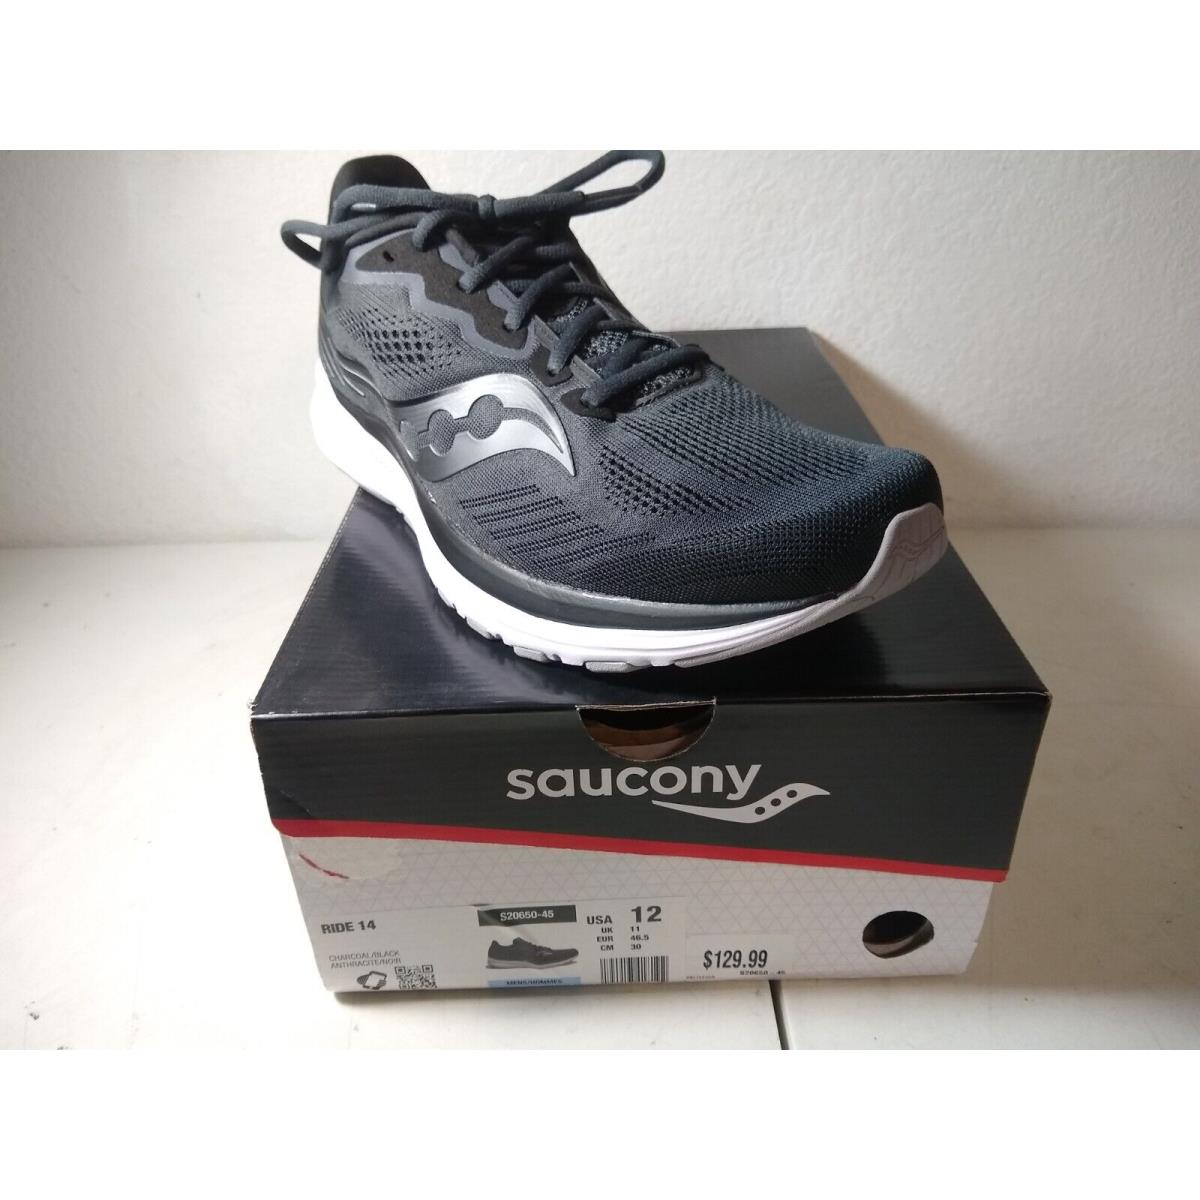 Saucony Ride 14 Running Shoes - Men`s Size 12 - Charcoal - New/never Worn